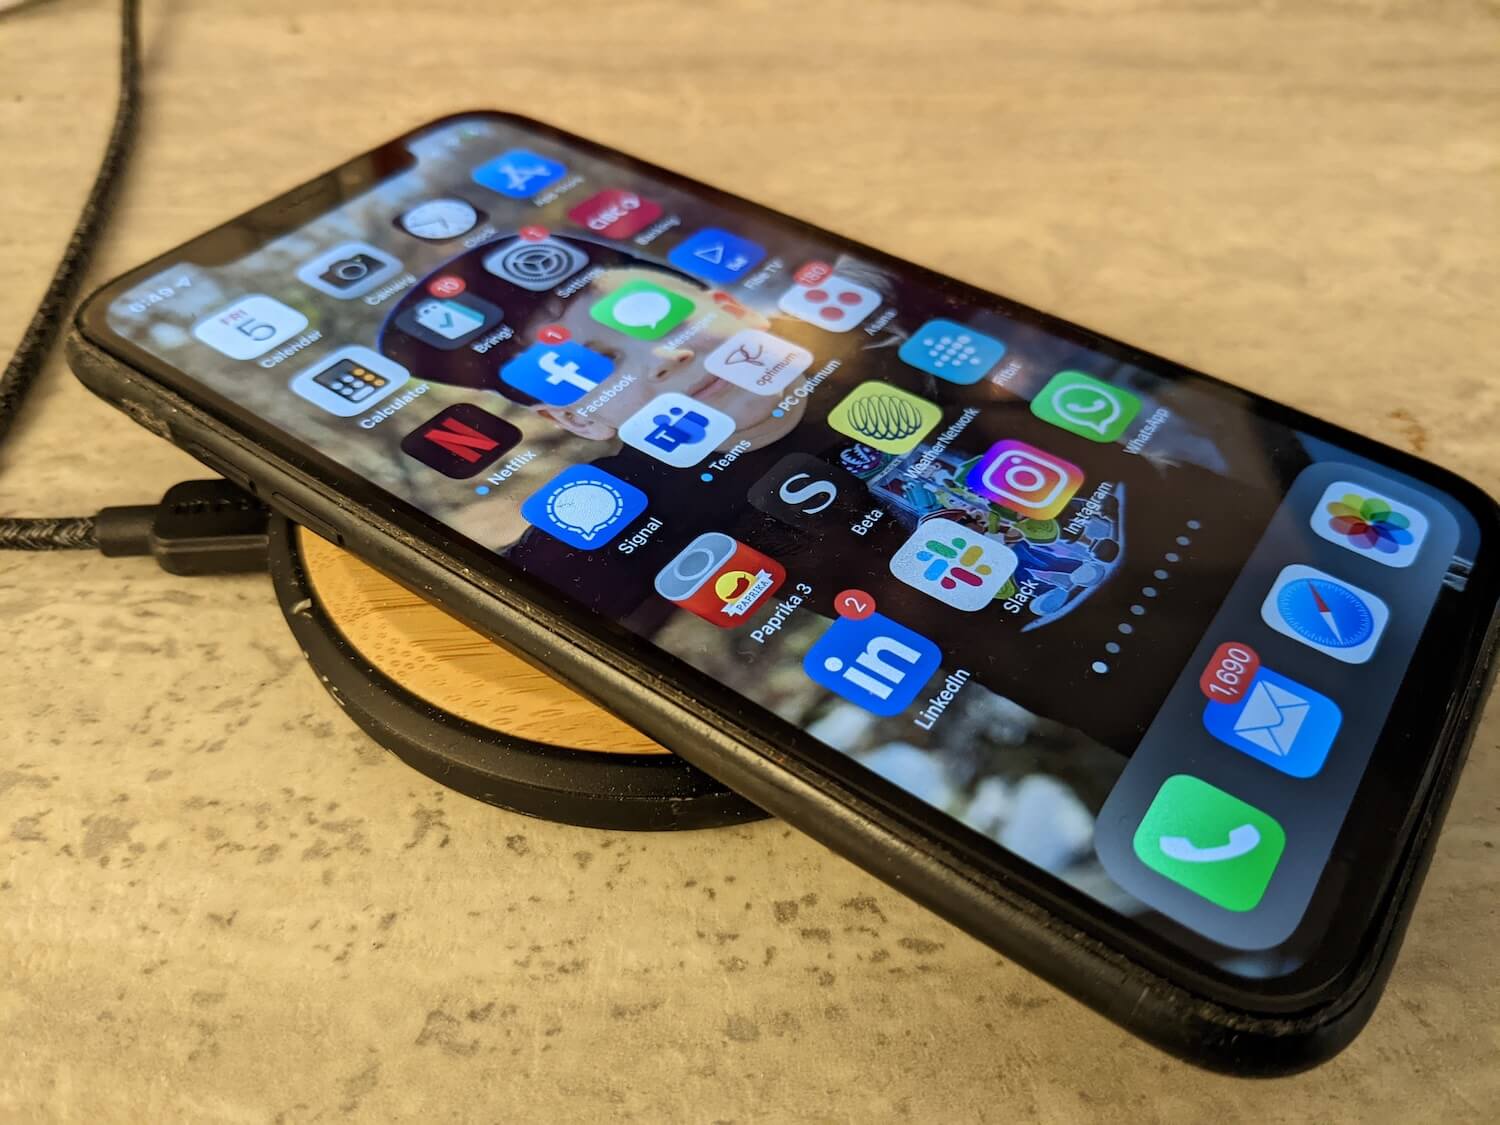 iPhone on One Drop wireless charger